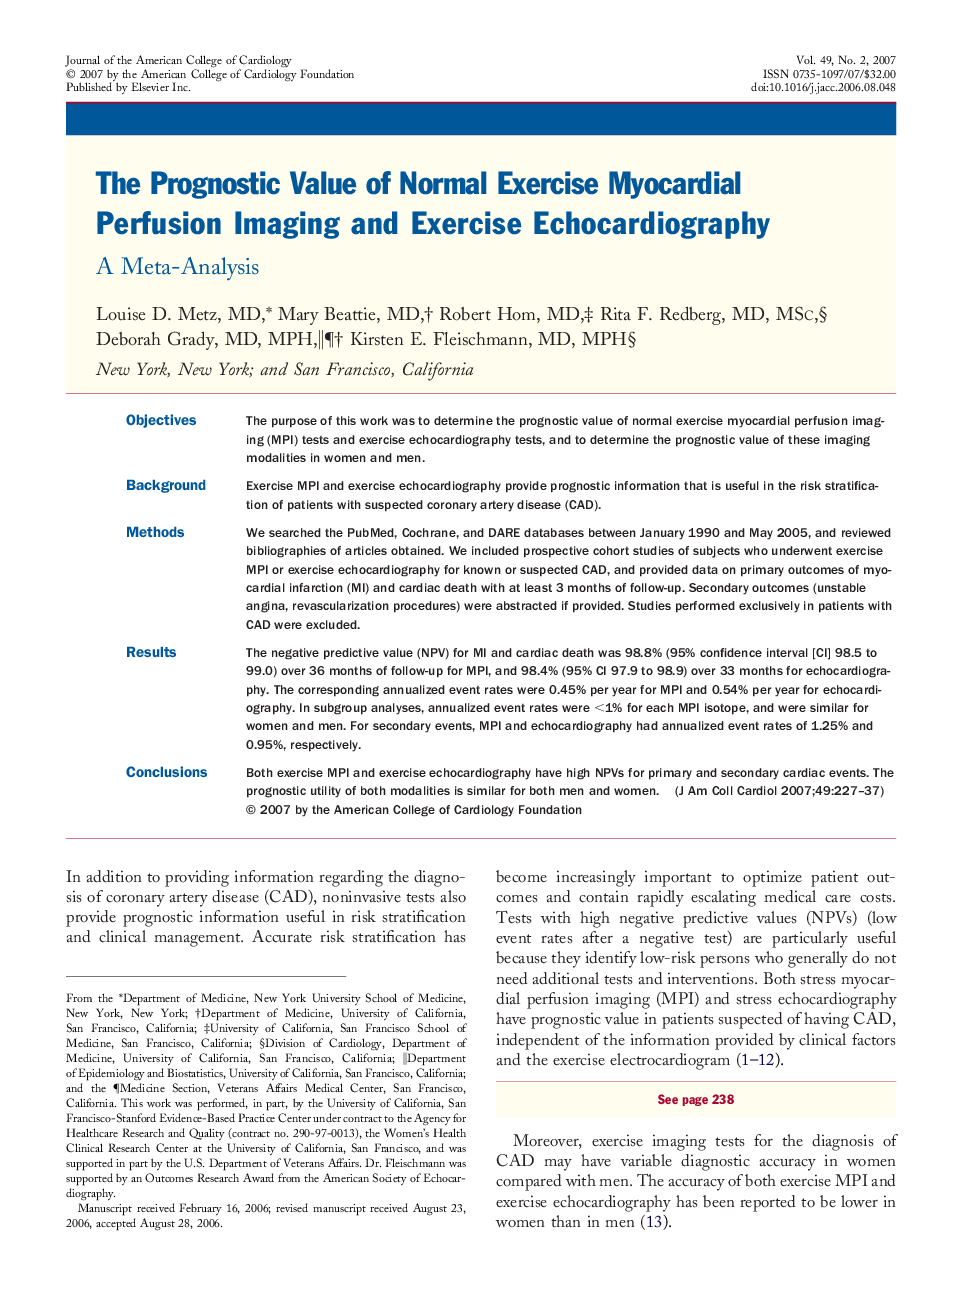 The Prognostic Value of Normal Exercise Myocardial Perfusion Imaging and Exercise Echocardiography : A Meta-Analysis